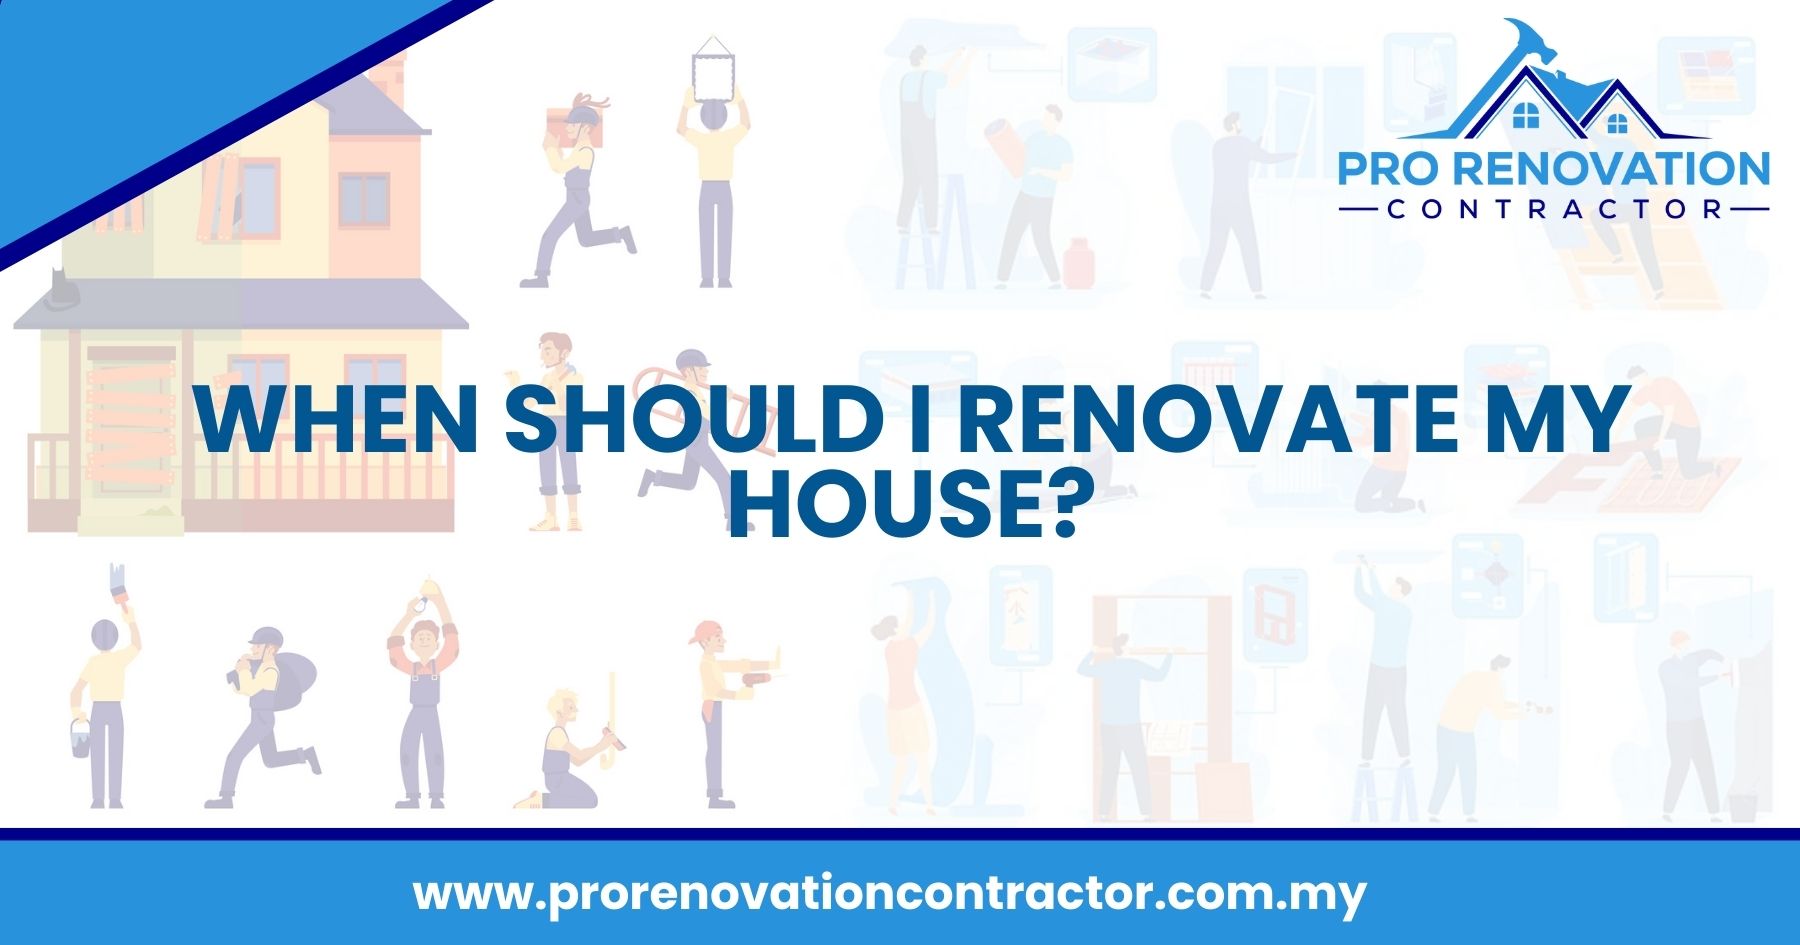 When Should I Renovate My House